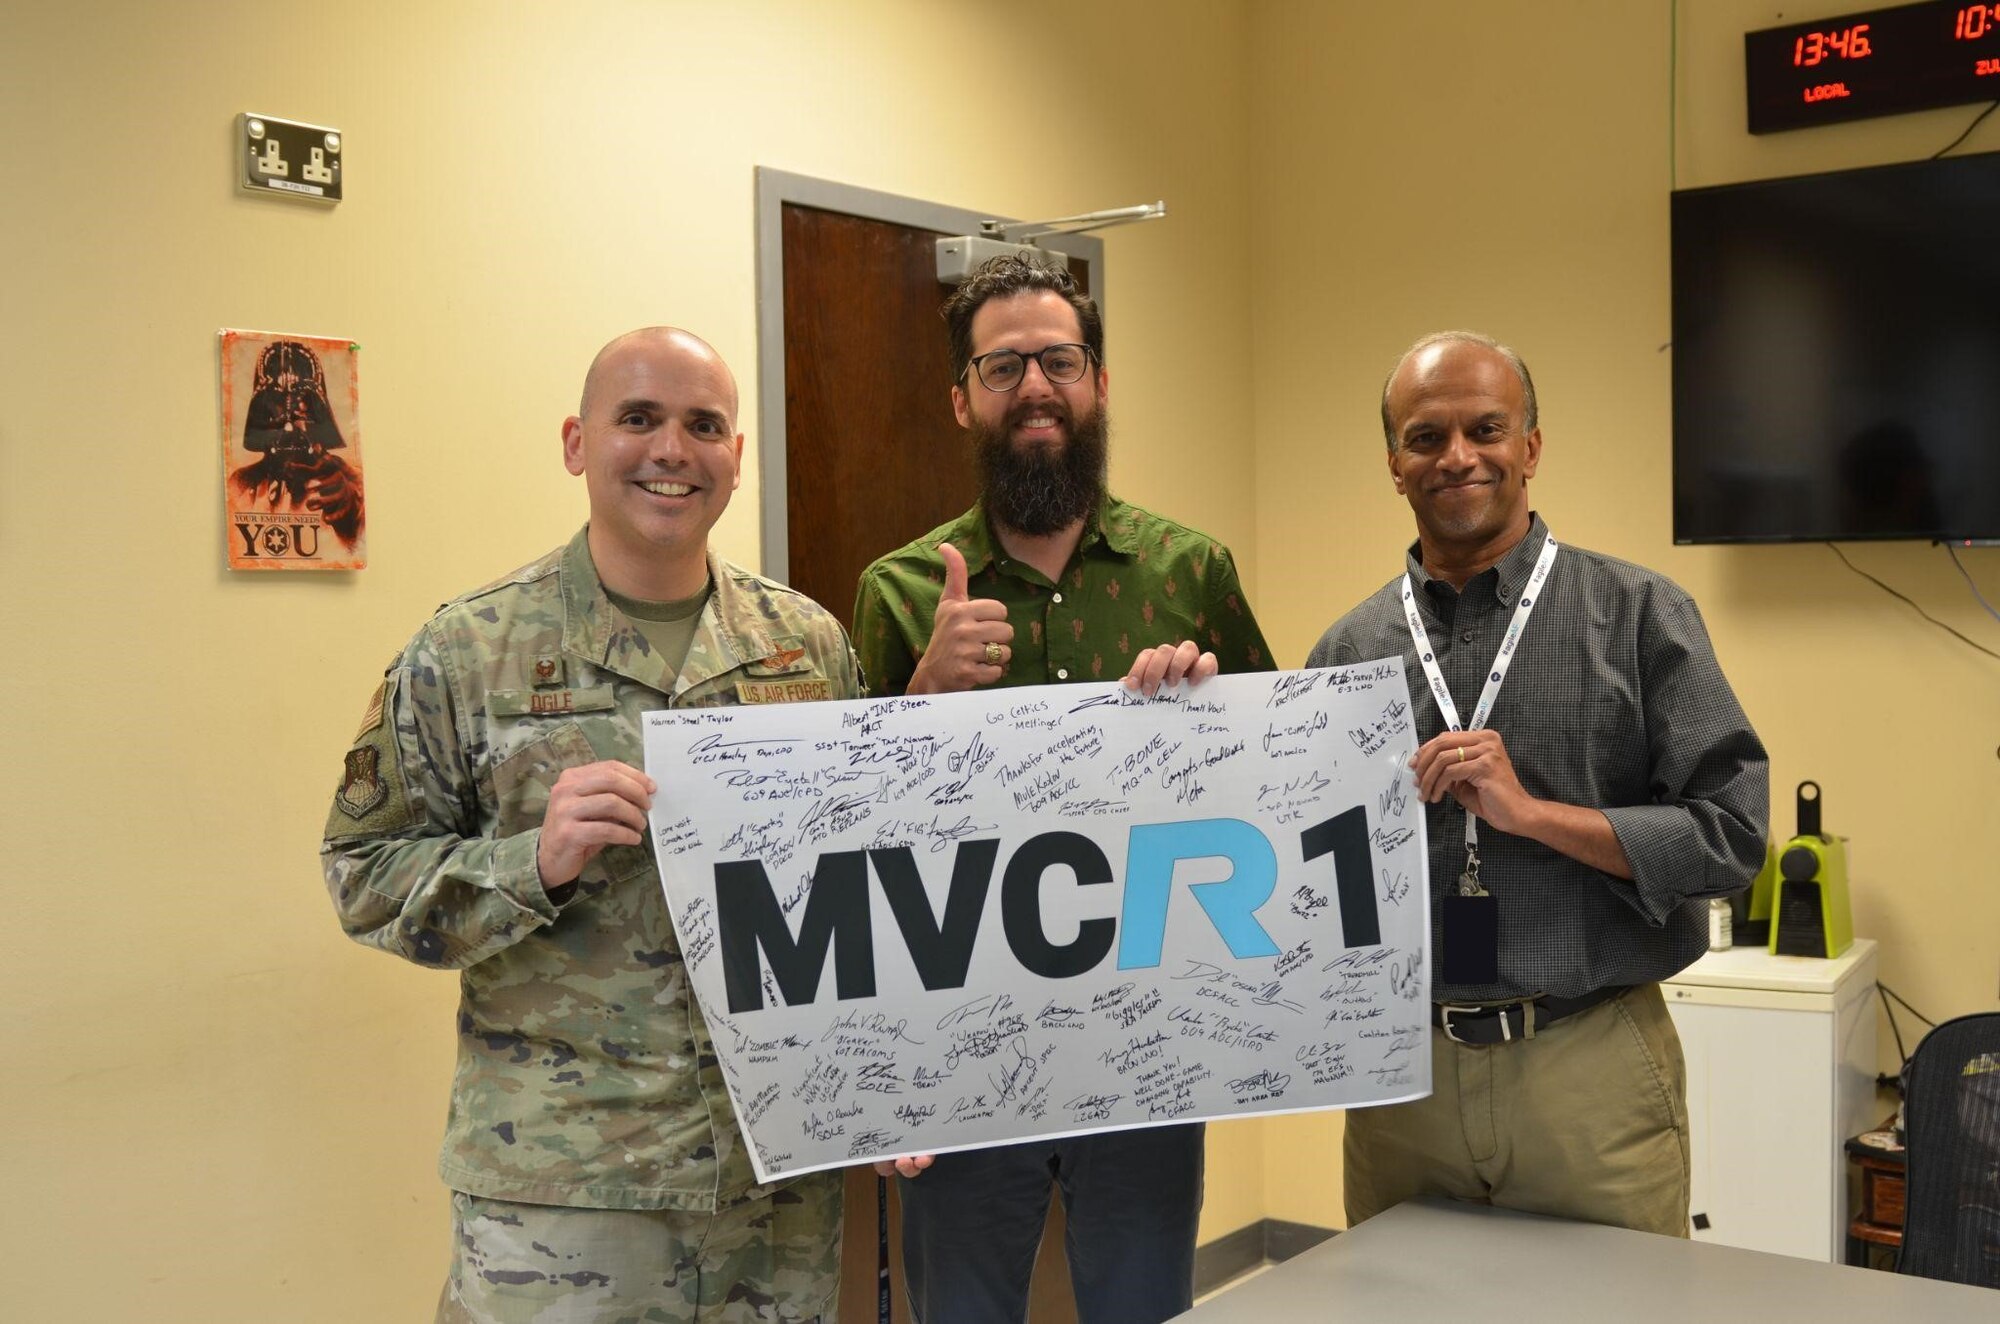 U.S. Air Force members and Kessel Run personnel celebrate the successful adoption of Kessel Run’s Minimum Viable Capability Release 1, at the 609th Air Operations Center Headquarters, Al Udeid Air Base, Qatar, Sept. 21, 2022. Kessel Run is a Division within Air Force Life Cycle Management Center’s Digital Directorate.